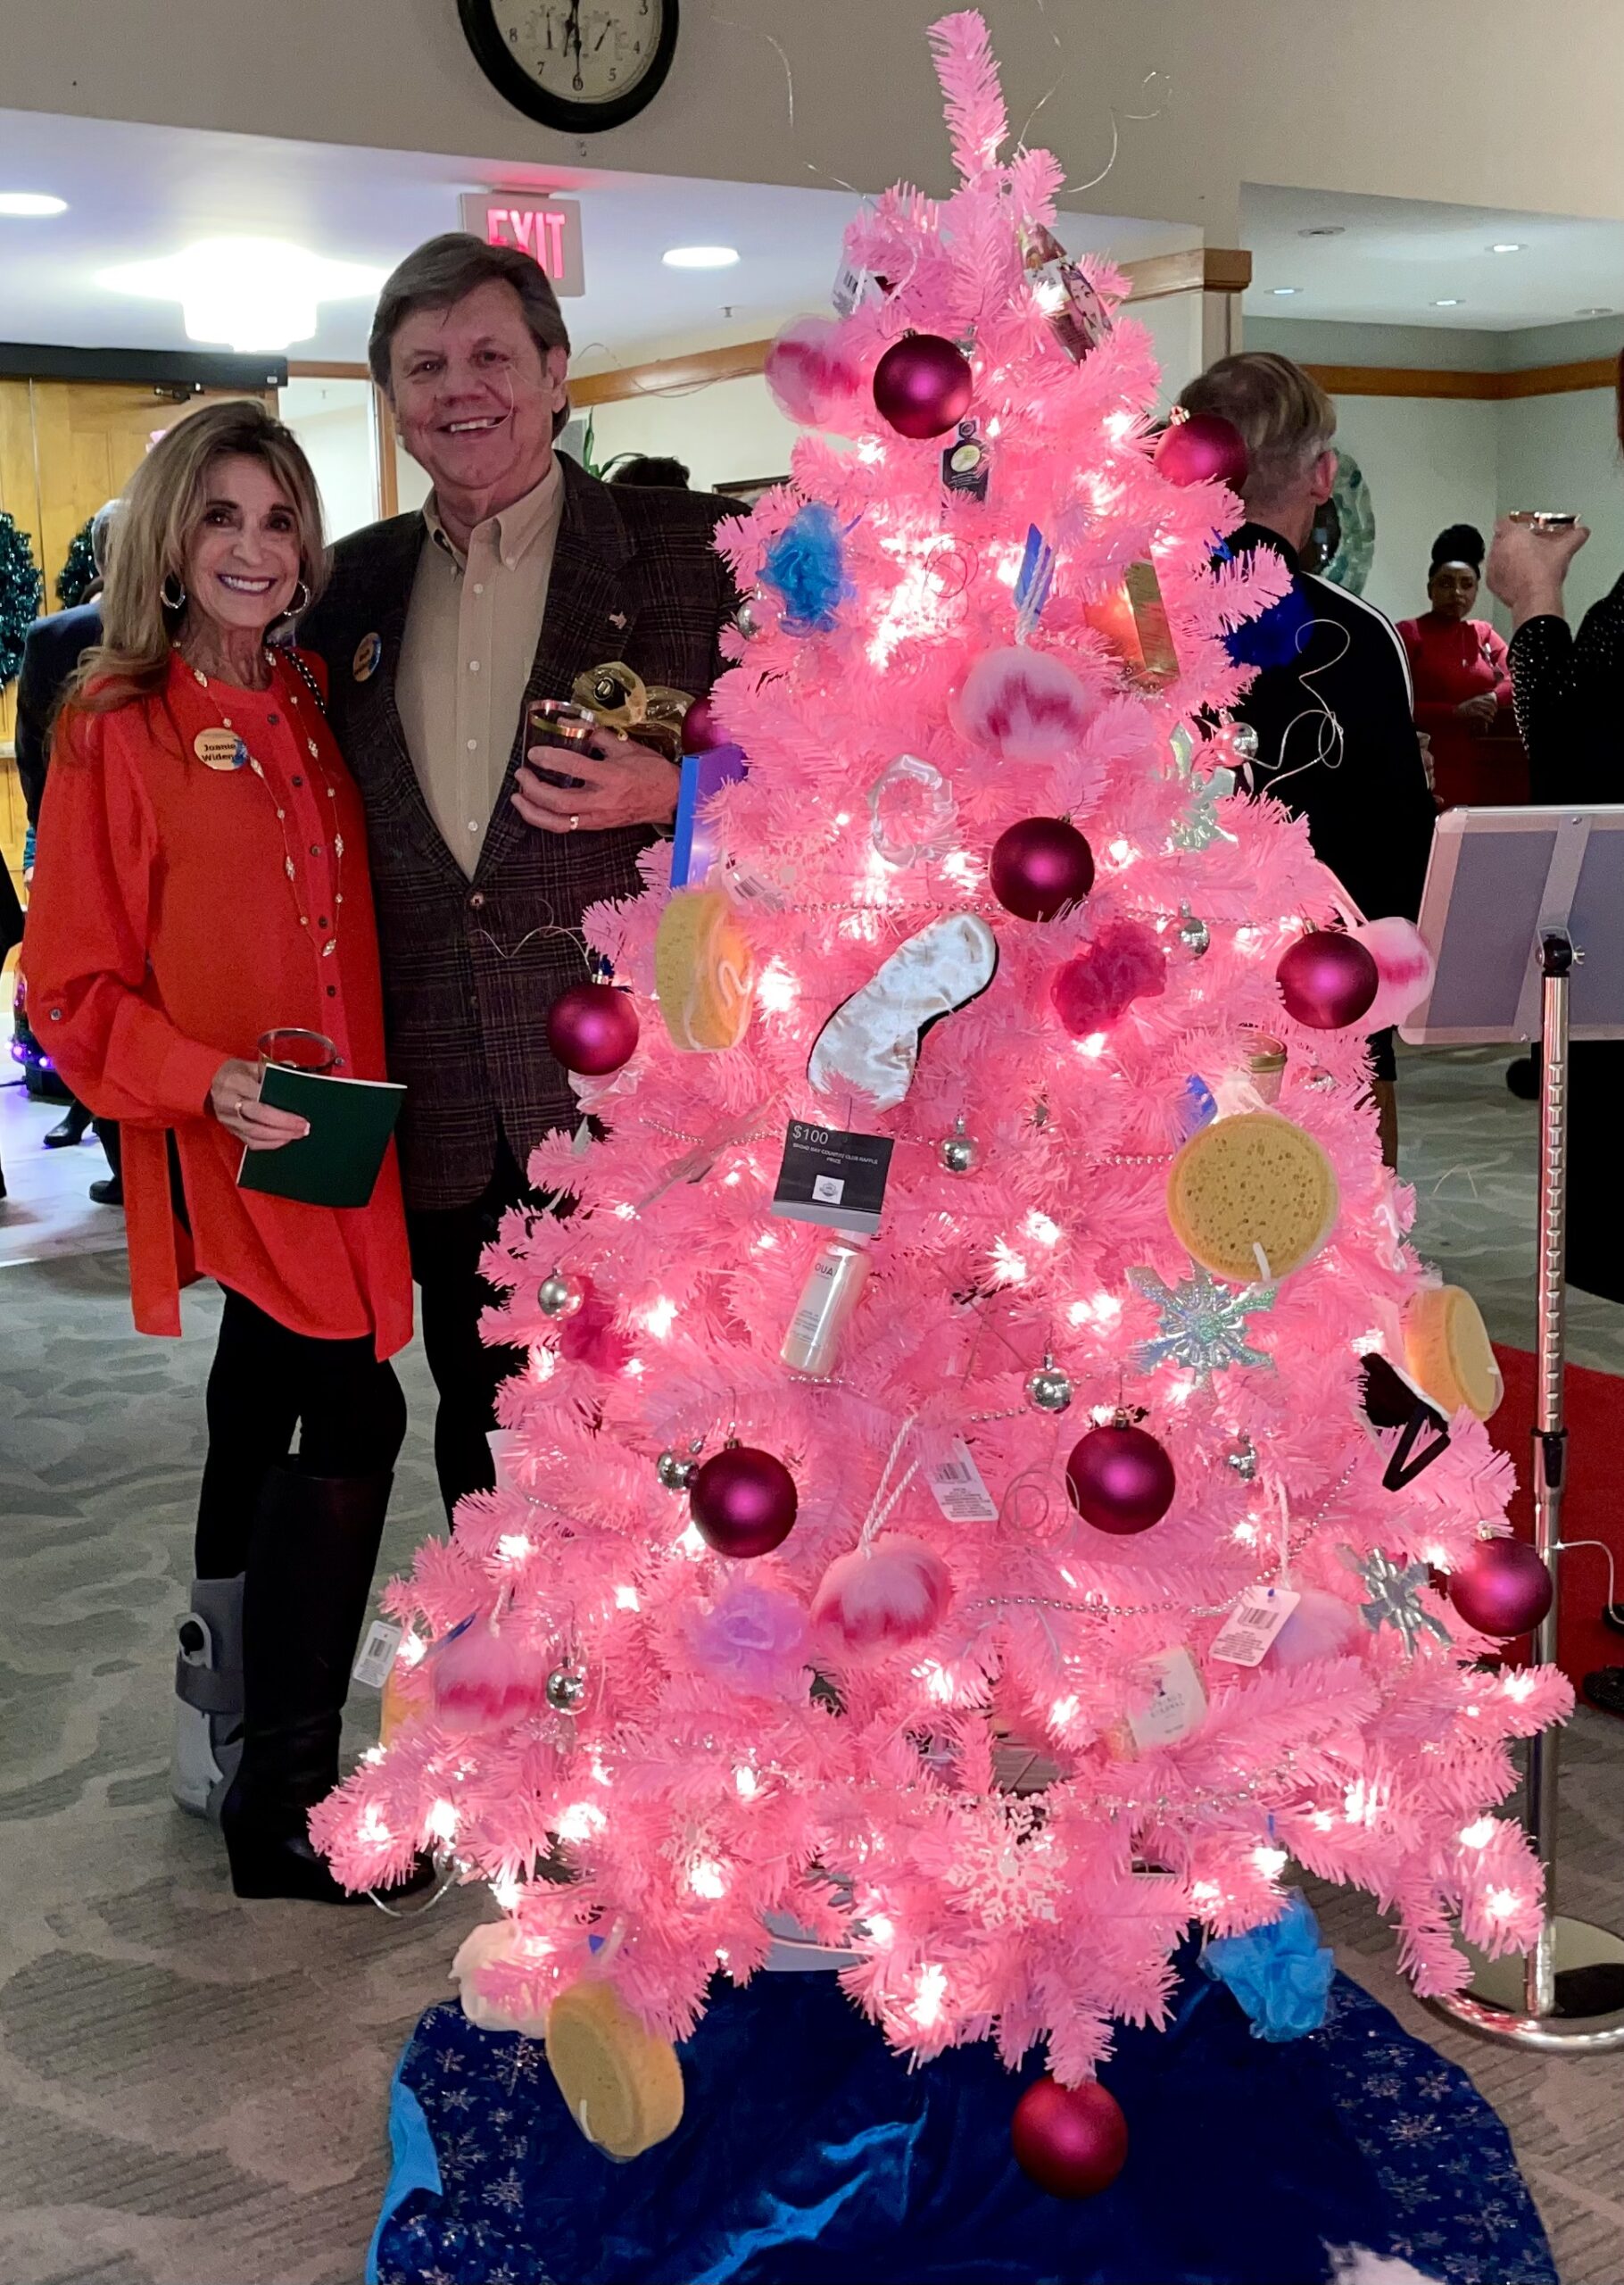 Man and Woman Smiling Behind Pink Christmas Tree